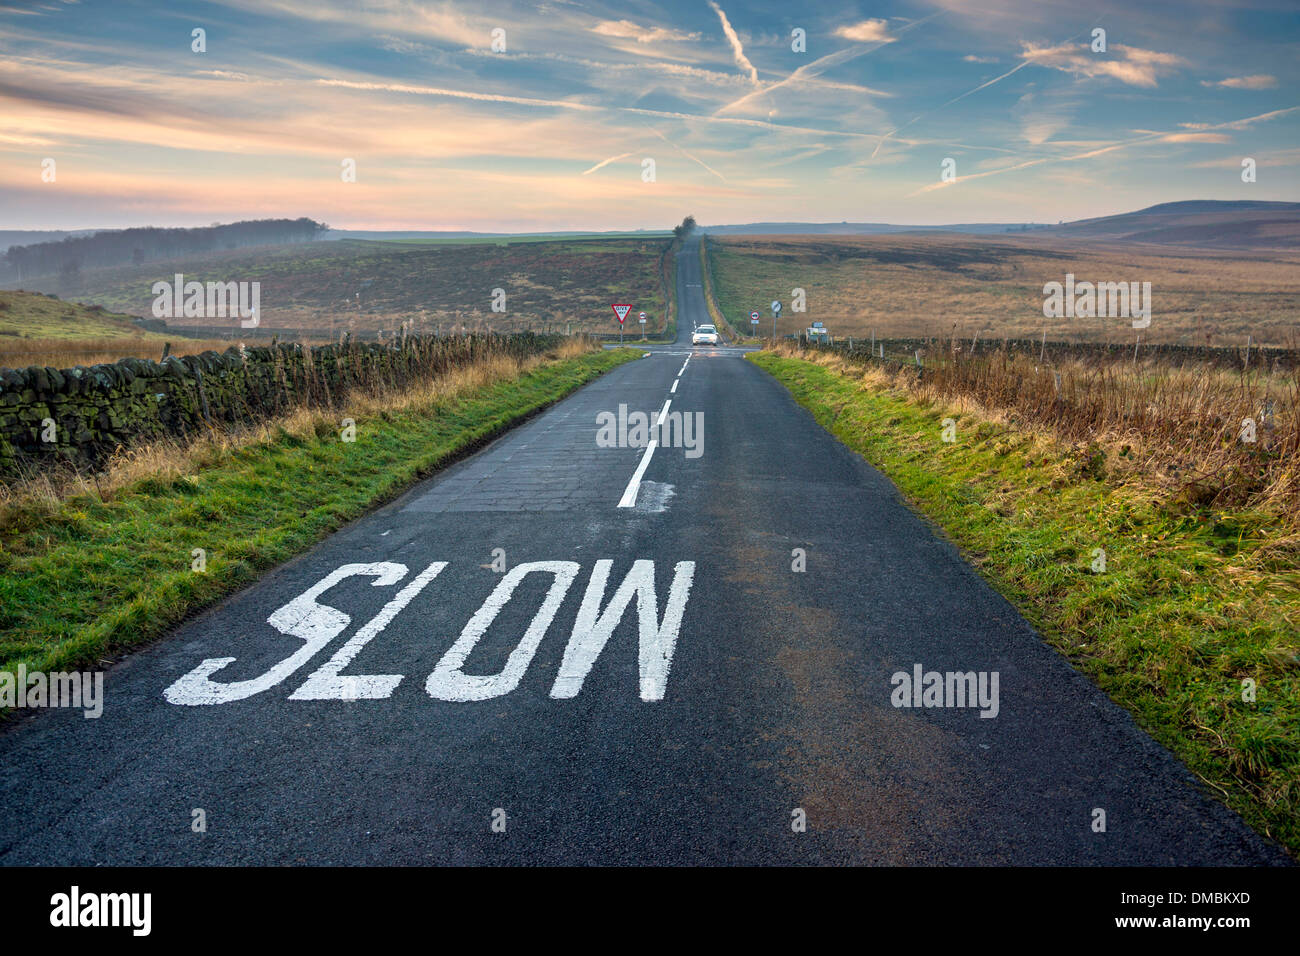 Road with slow sign perspective, distance, vanishing point Stock Photo